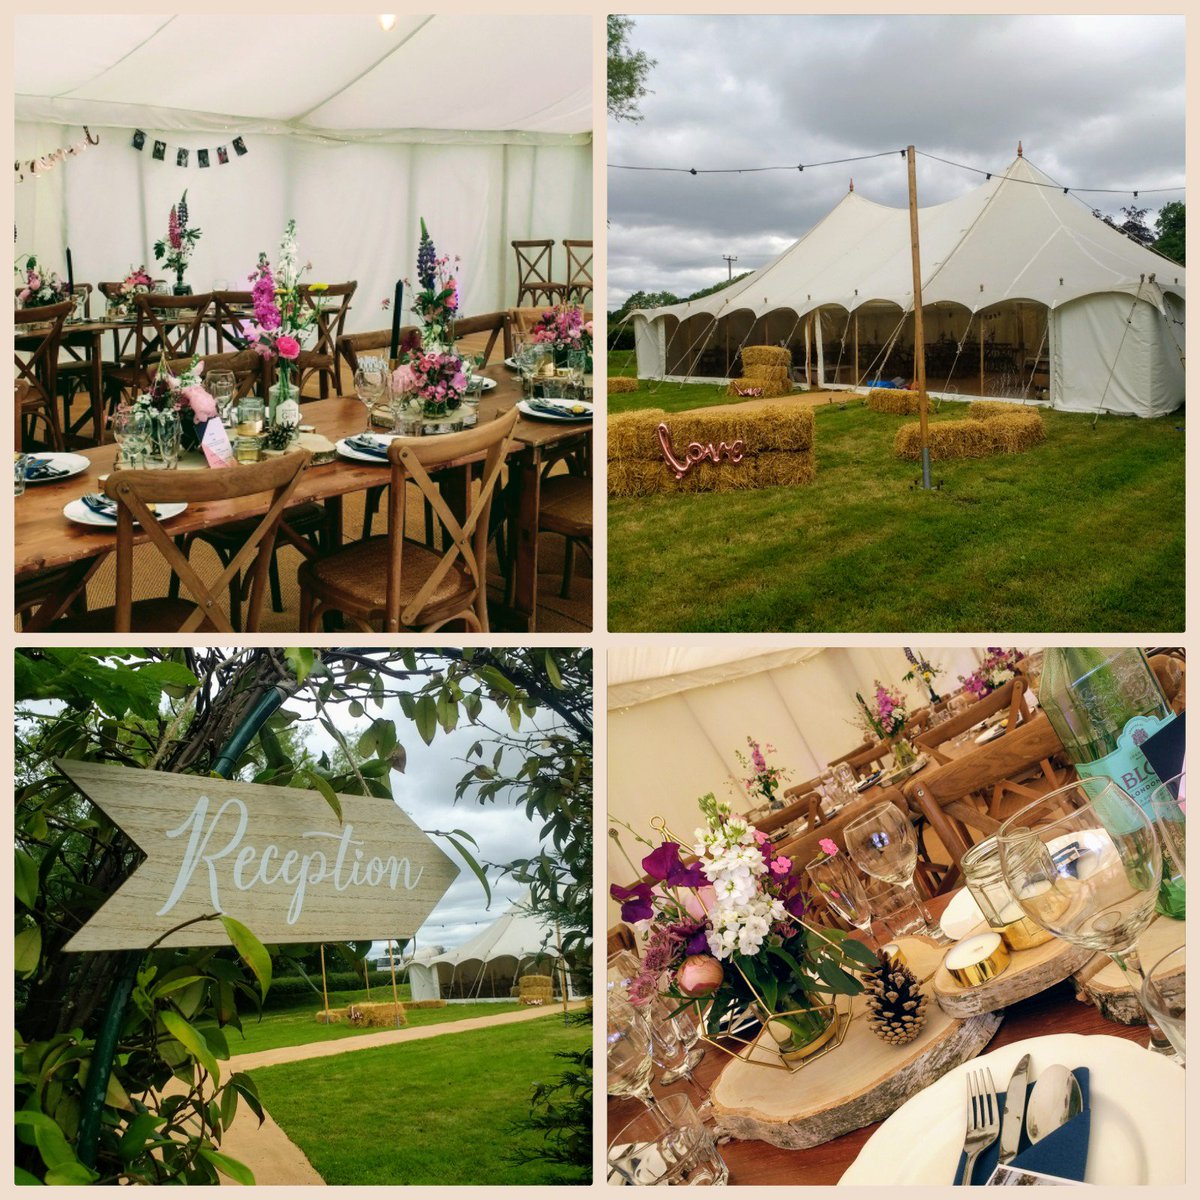 Huge congratulations to Helen & David whose #weddingreception was held in our grounds yesterday.
If you're looking for the perfect venue for a relaxed, country style, #pubwedding then pls contact us.
•
#countrywedding #weddingvenue #CholmondeleyArms #cheshire #cholmondeley #pub